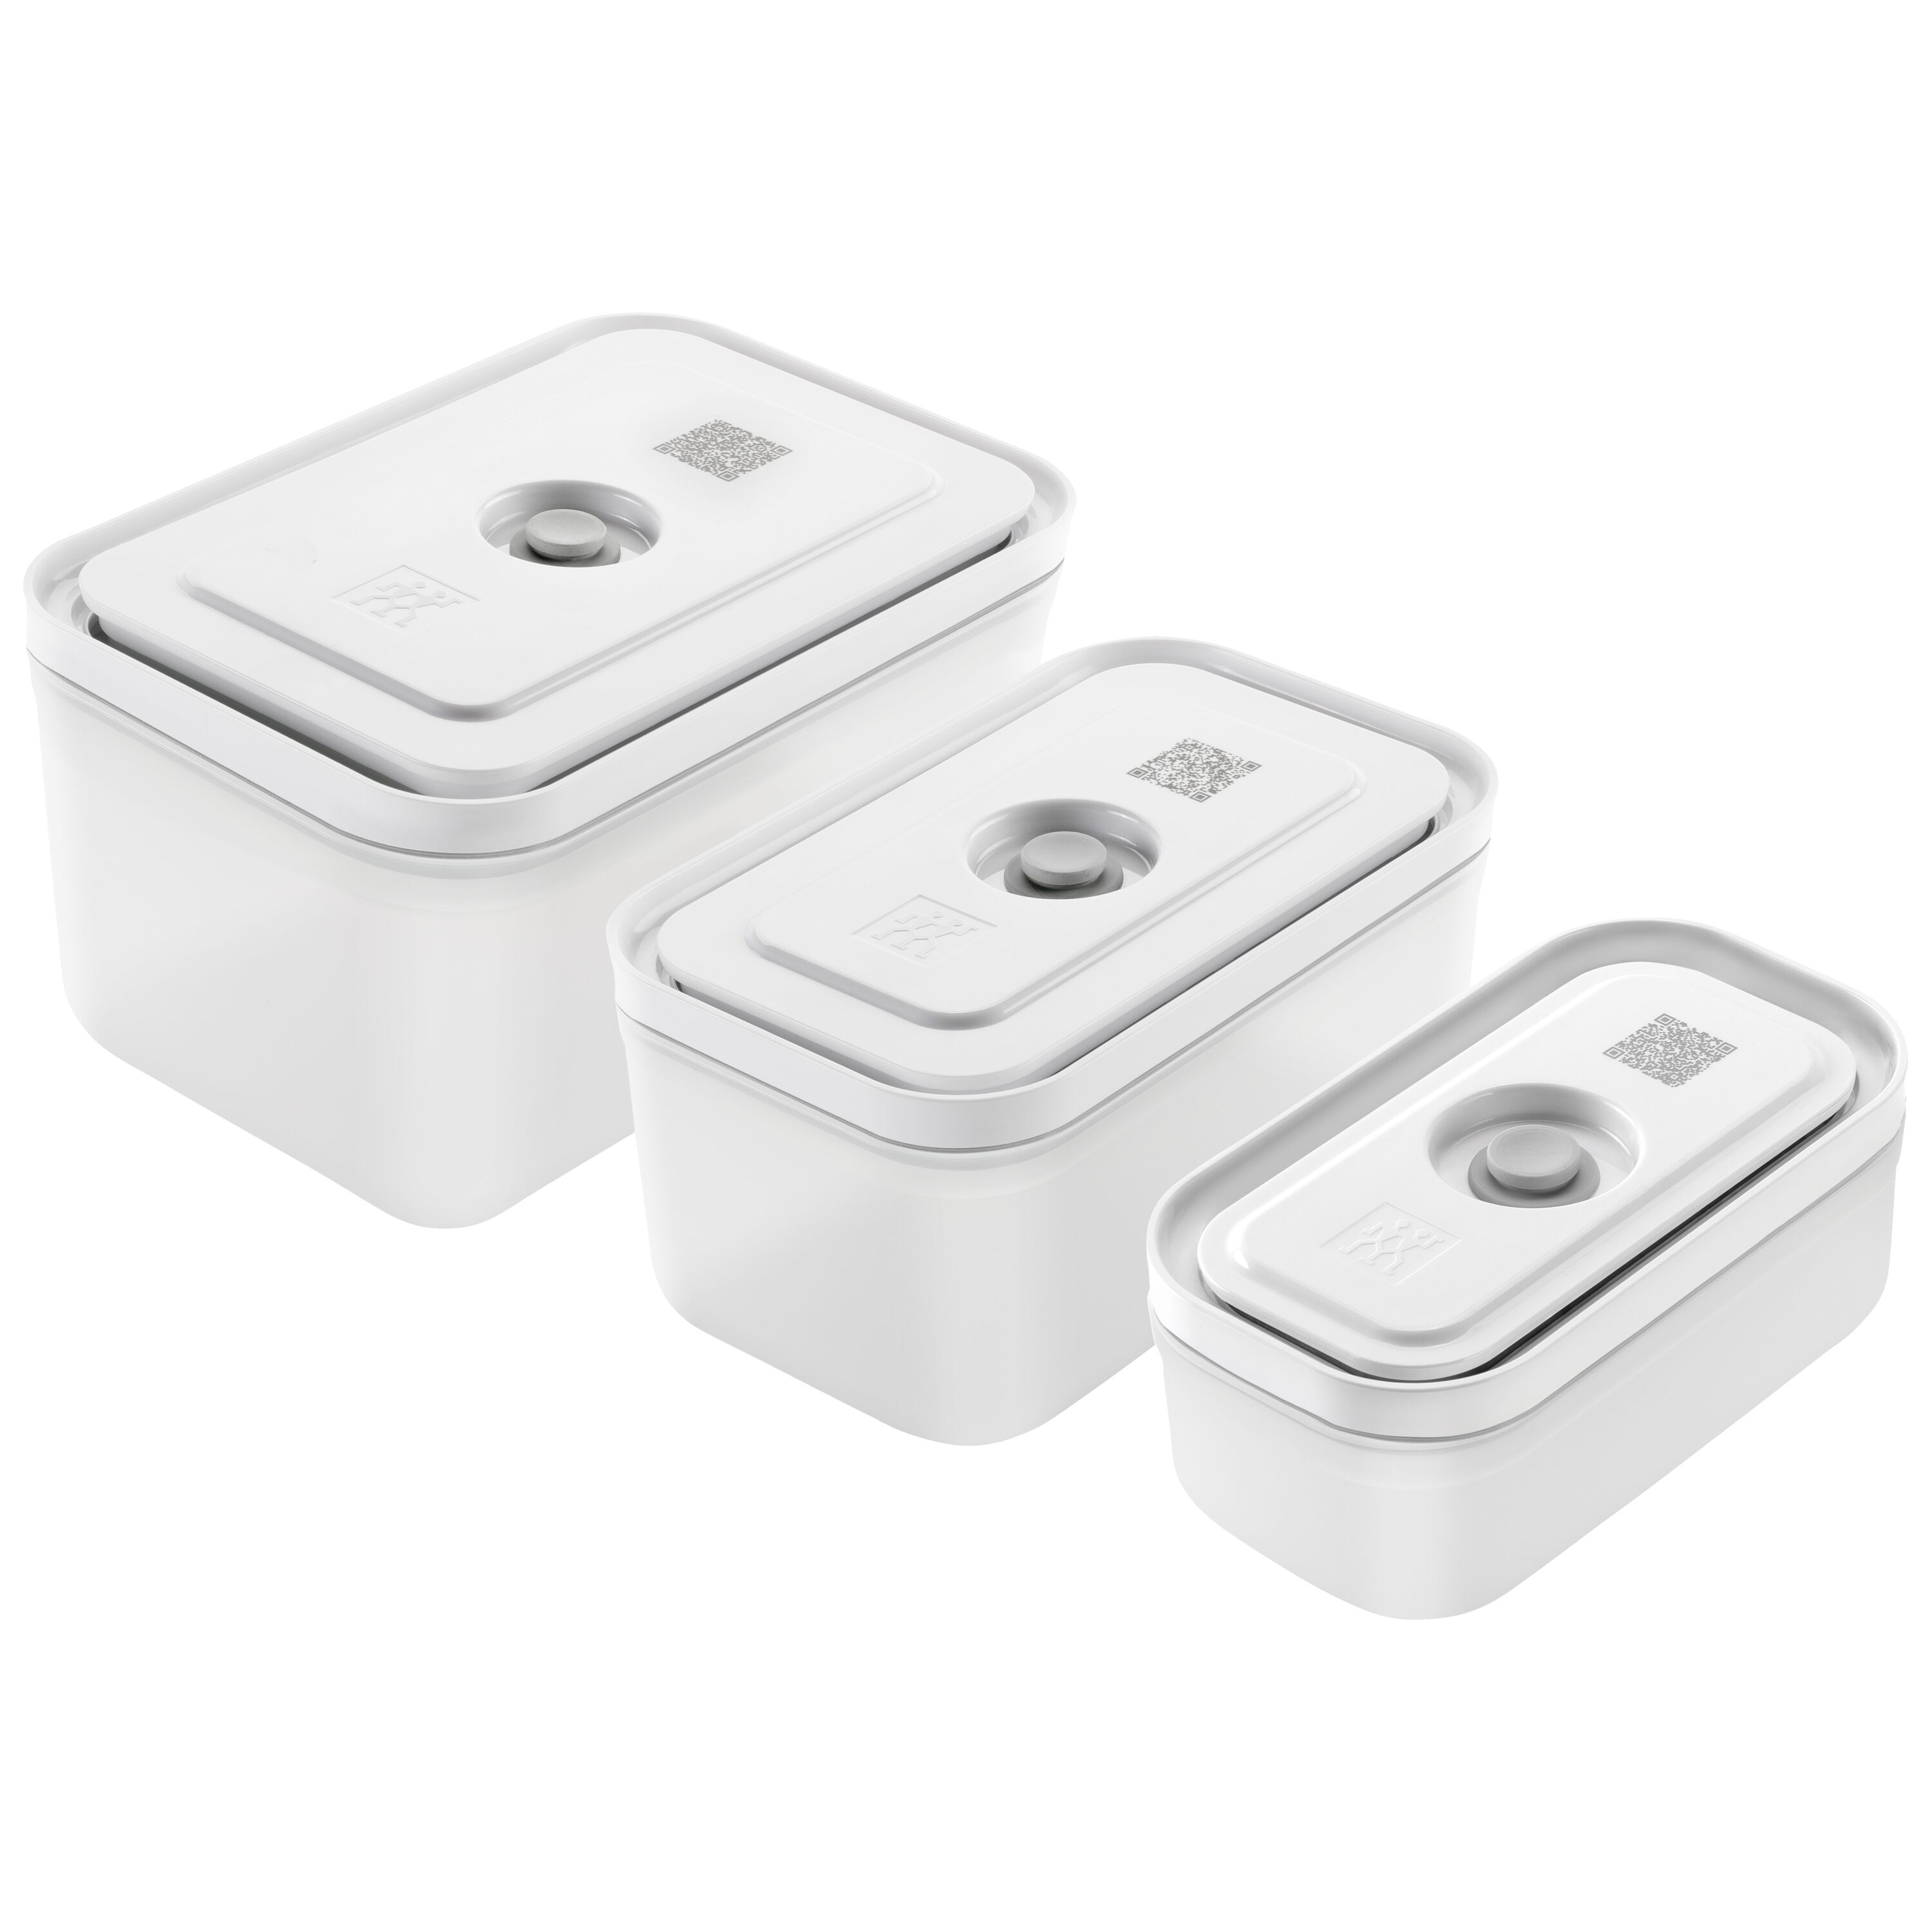 Zwilling Fresh & Save 3-pc Plastic Vacuum Food Storage Containers